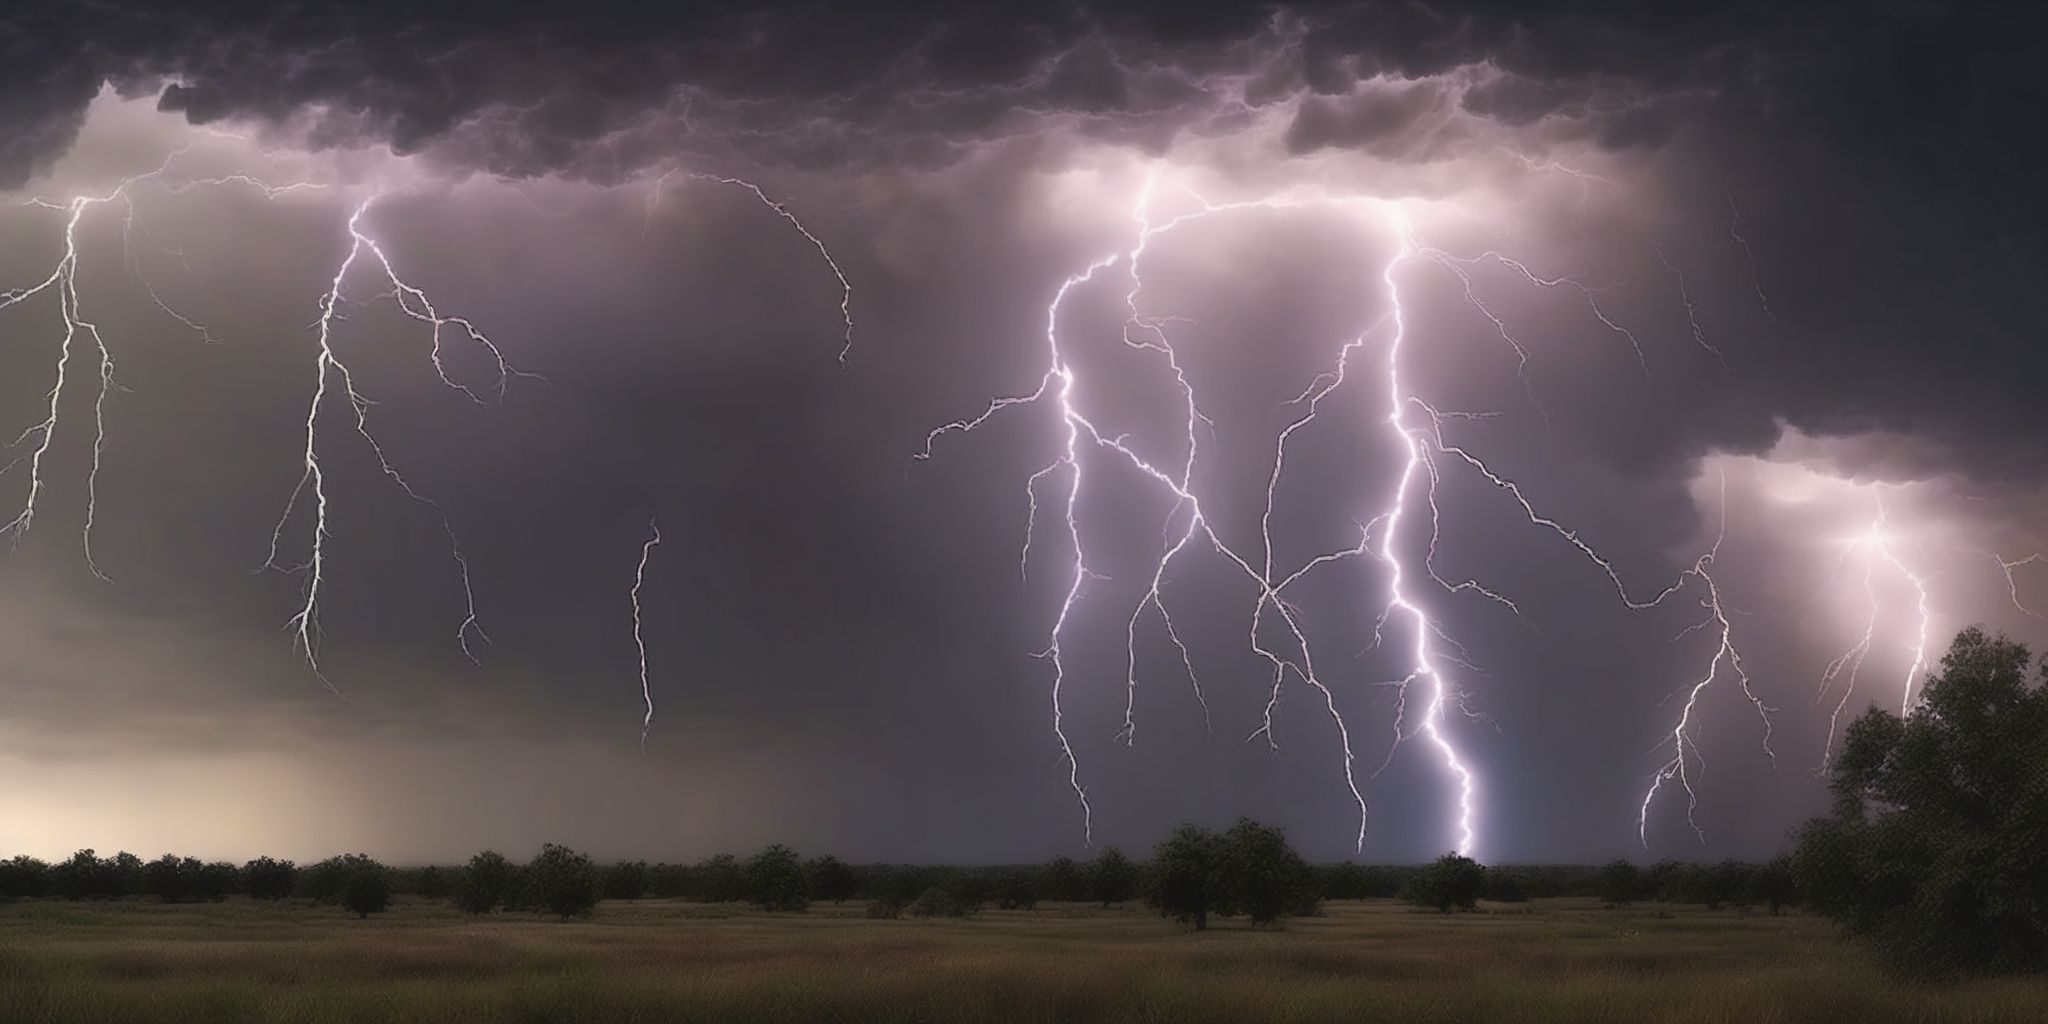 Lightning strike  in realistic, photographic style